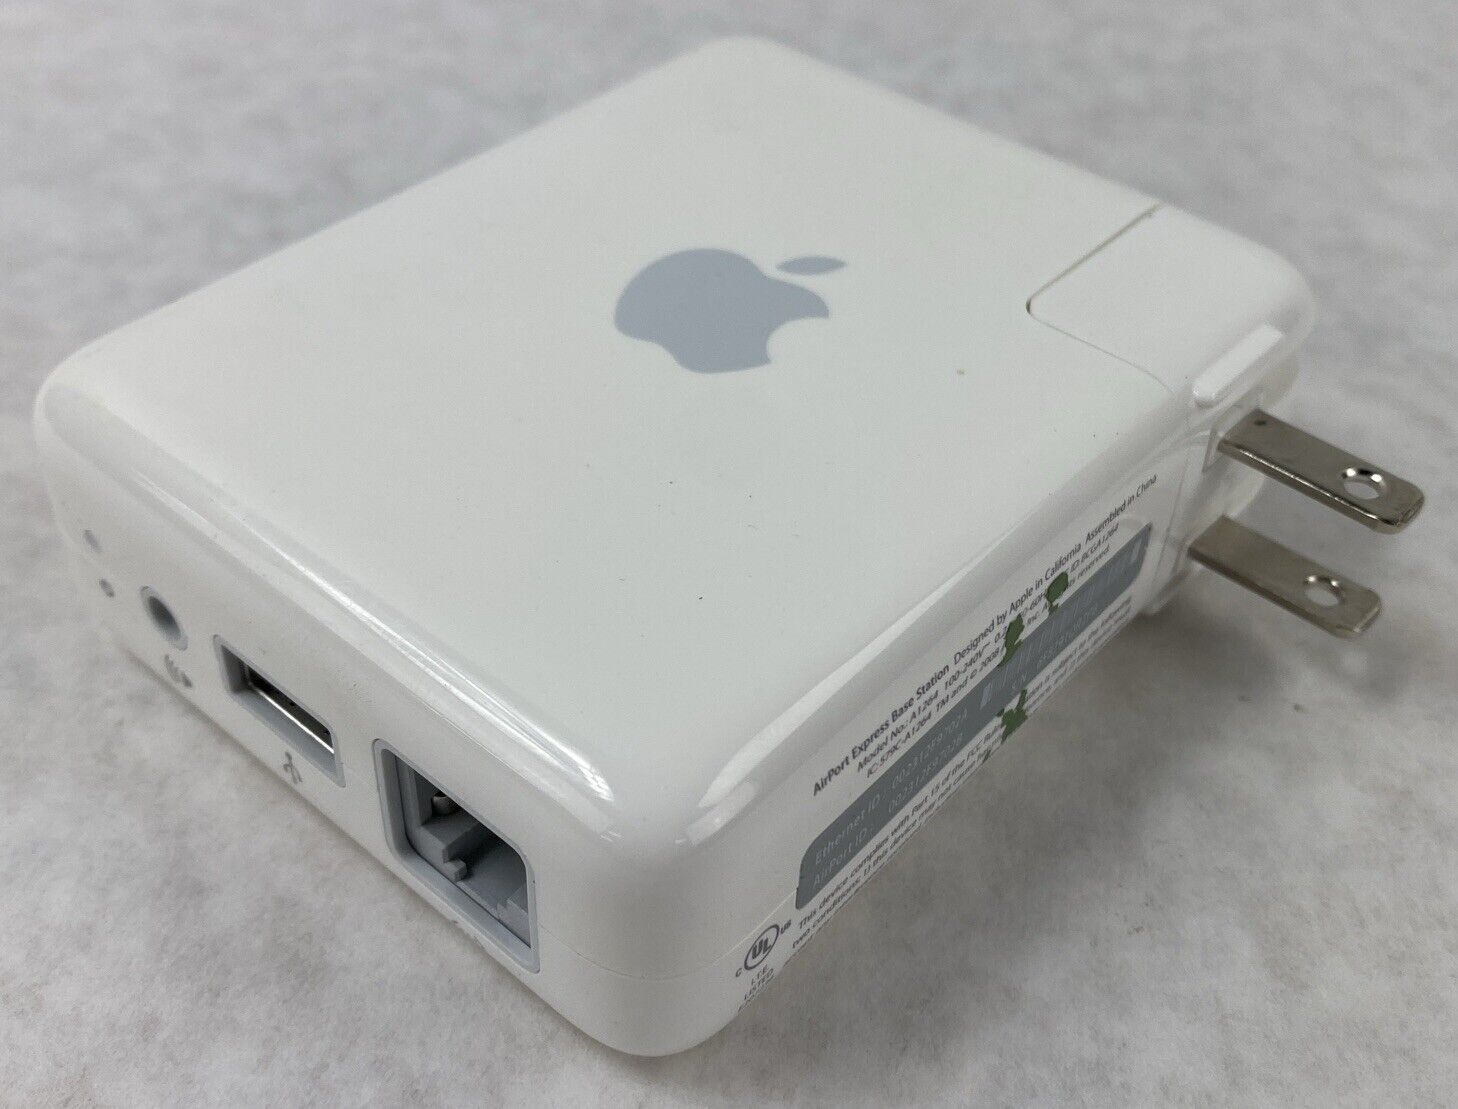 Apple A1264 Airport Express 802.11n Wi-Fi Router Extender Generation 1